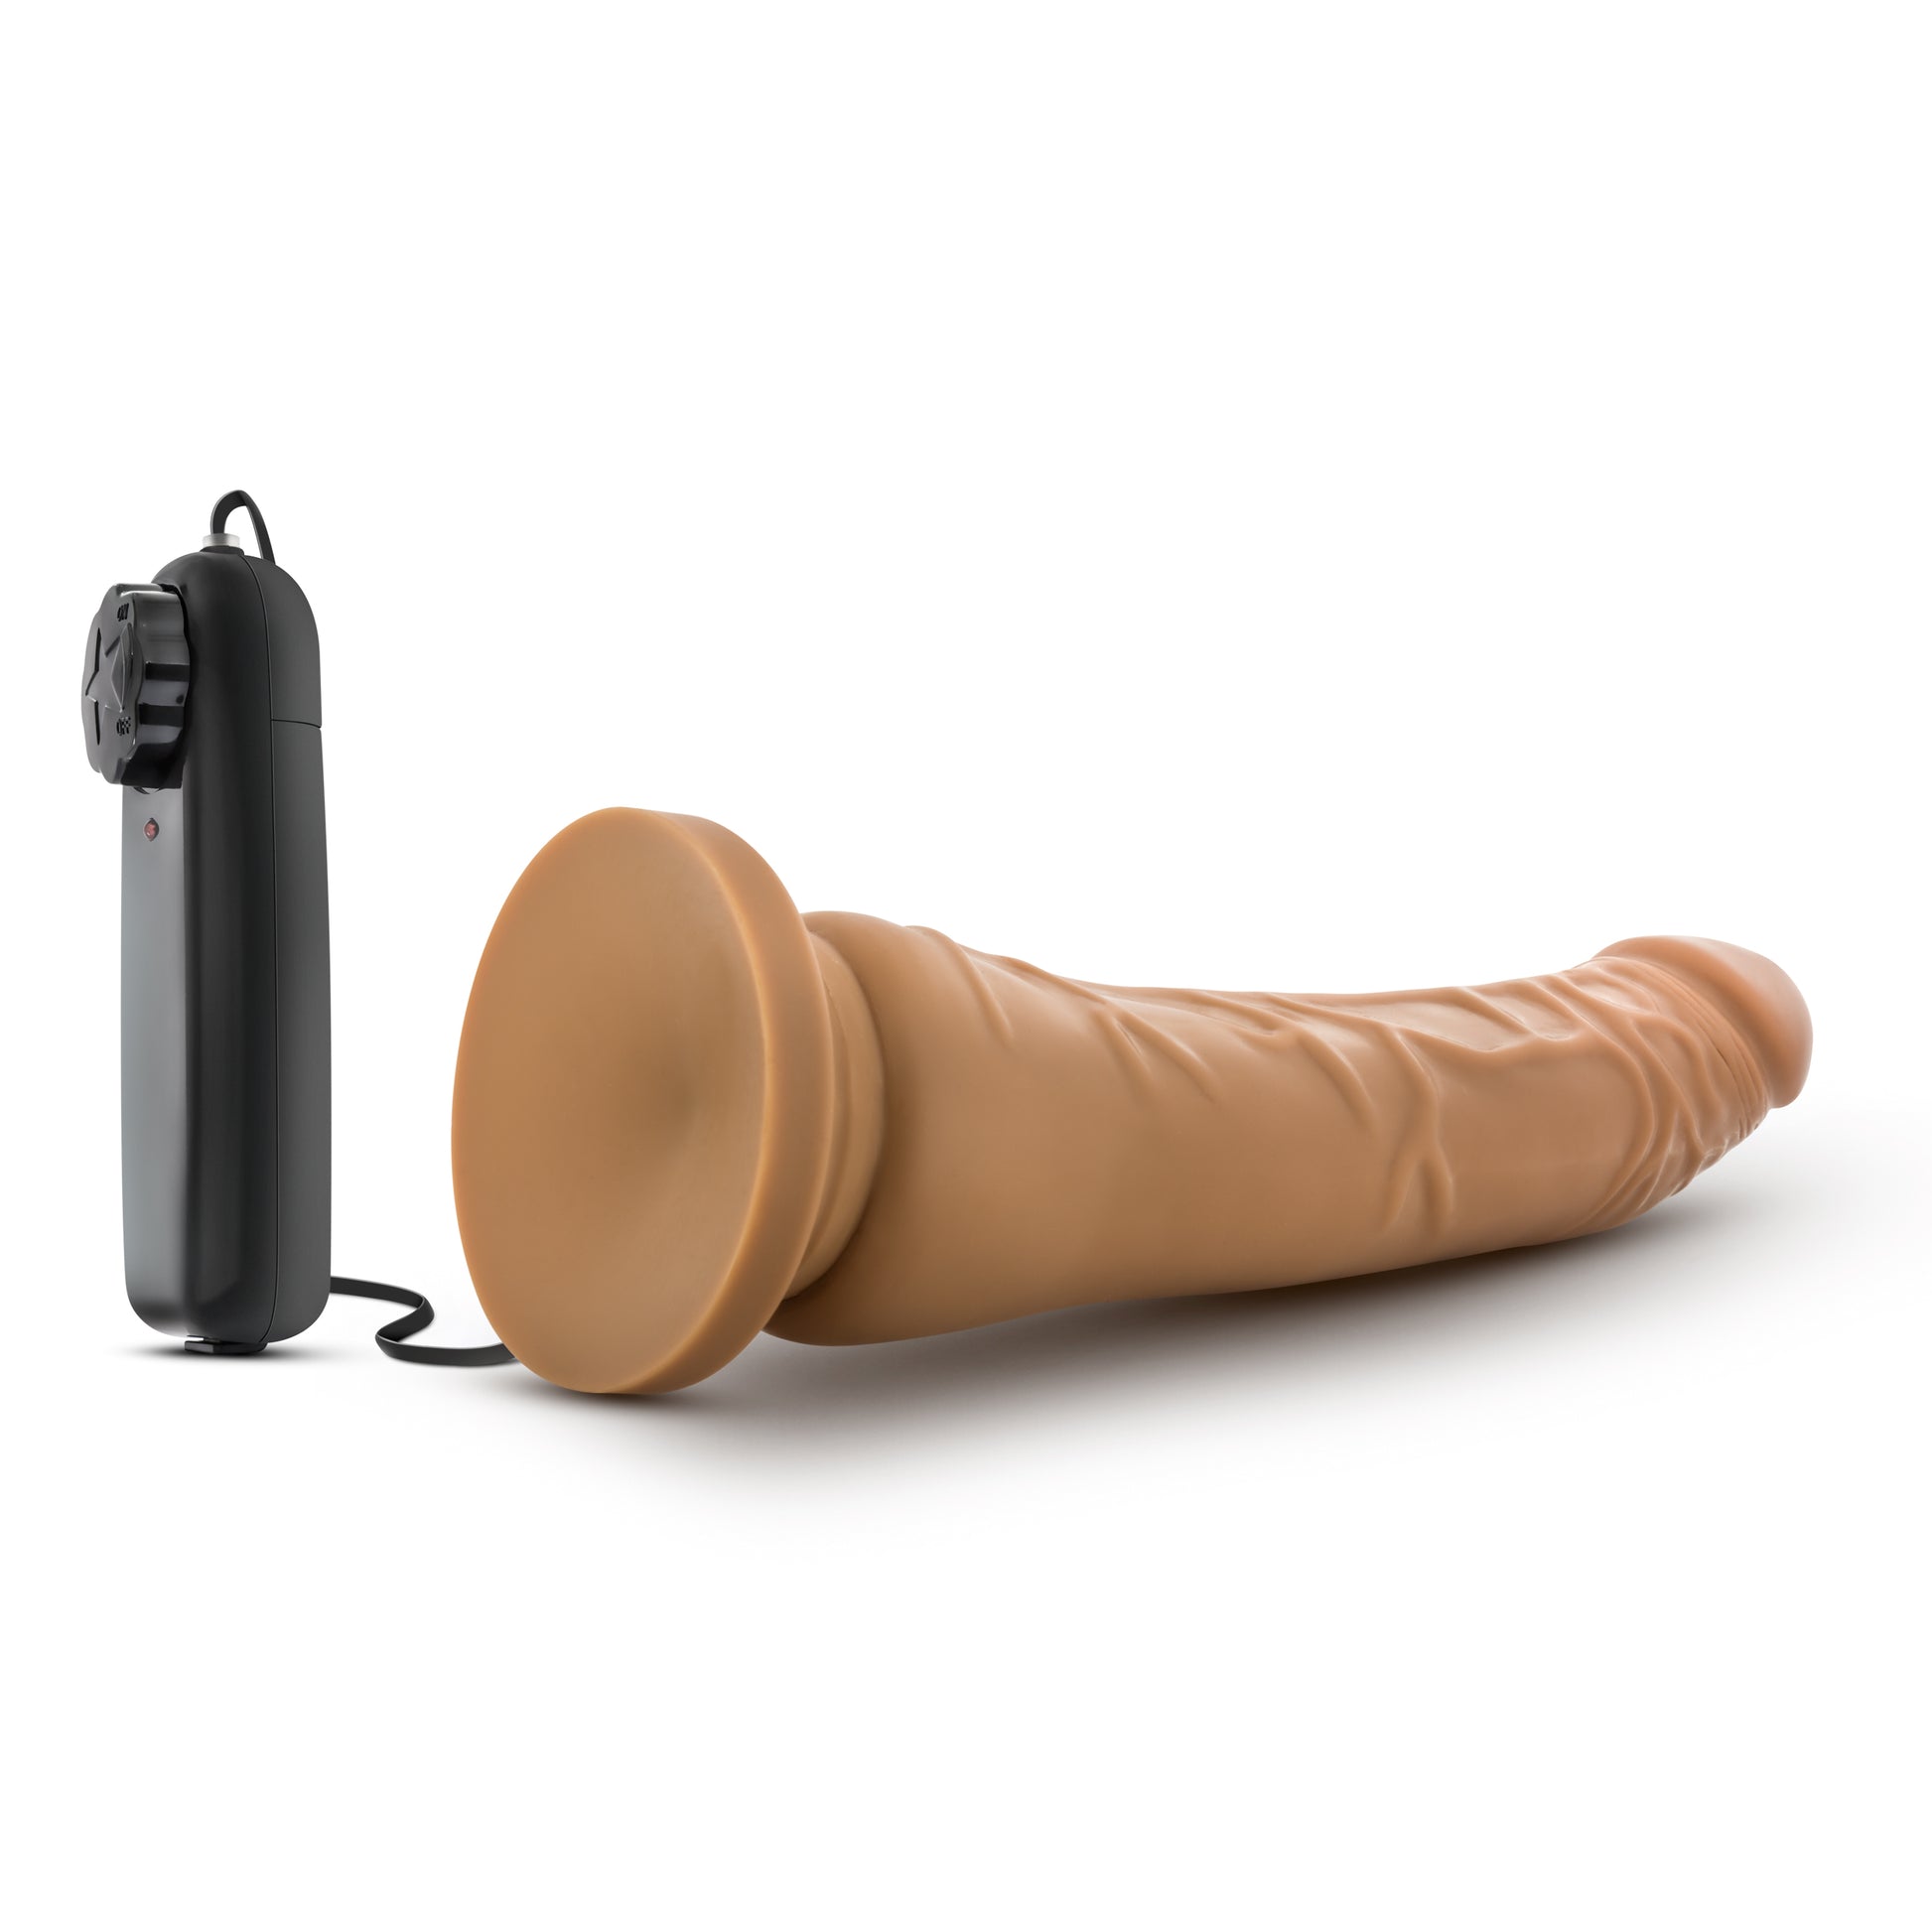 Dr. Skin - 8.5 Inch Vibrating Realistic Cock With  Suction Cup - Mocha BL-13057